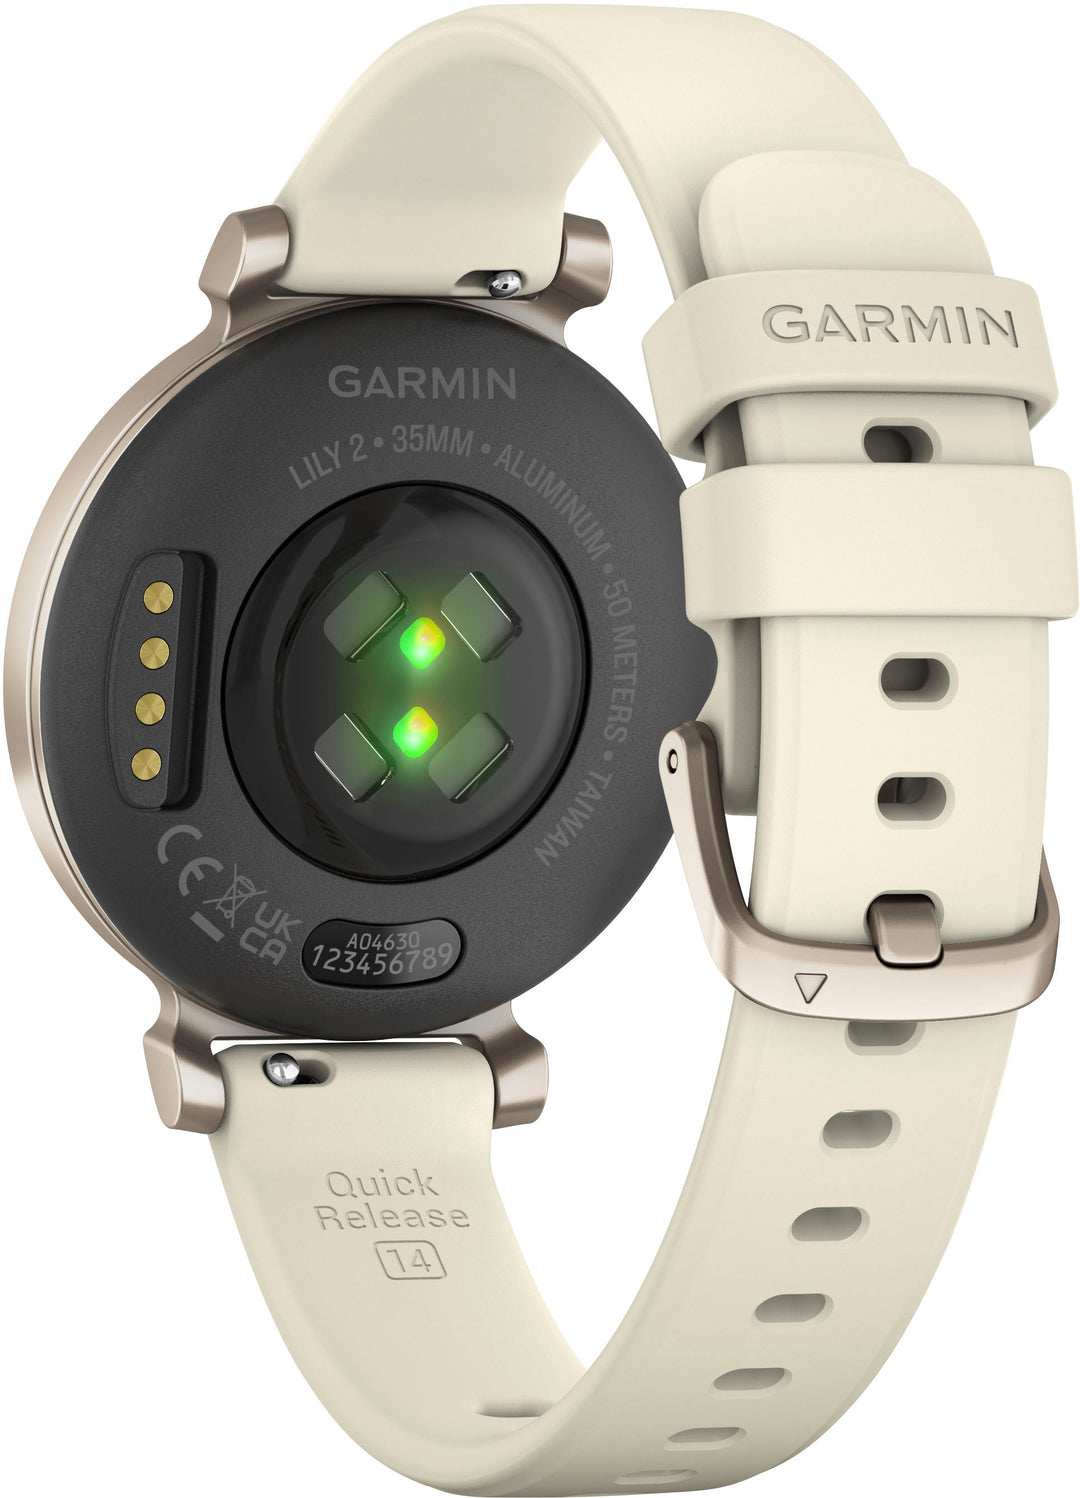 Garmin - Lily 2 Smartwatch 34 mm Anodized Aluminum - Cream Gold with Coconut Silicone Band_3